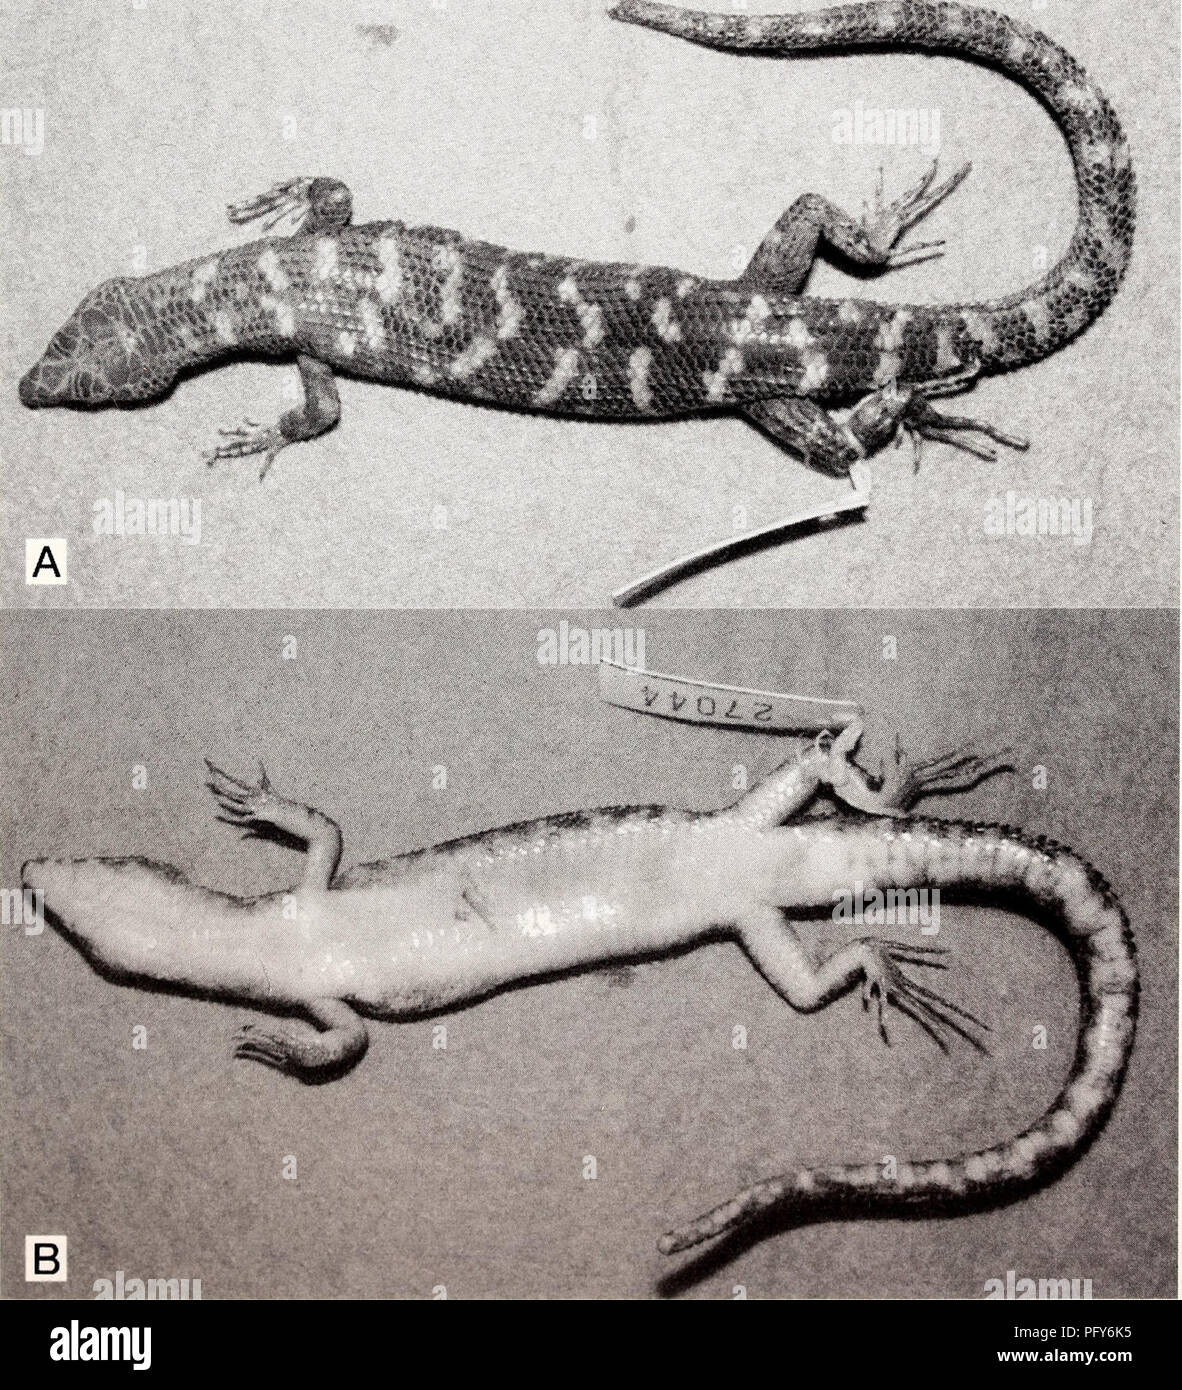 . Current herpetology. Reptiles; Herpetology. HIKIDA ET AL.—NEW DEPRESSED-BODIED TROPIDOPHORUS 17 Province, northern Vietnam, collected by R. W. Murphy, N. L. Orlov, A. Lathrop, T. Mason, S. Riabov, and T. C. Ho in May 1998. Paratypes Four males, ROM 41220 (ROM Field No. 26739), 41222 (Field No. 26960), 41223 (Field No. 26961) and 41226 (Field No. 27002), and seven females, ROM 41221 (ROM Field No. 26959), 41224 (Field No. 27000), 41225 (Field No. 27001), 41228 (Field No. 27045), 41229 (Field No. 27058), 41230 (Field No. 27059) and KUZ R58270 (Field No. 27003), with same sampling data as the h Stock Photo